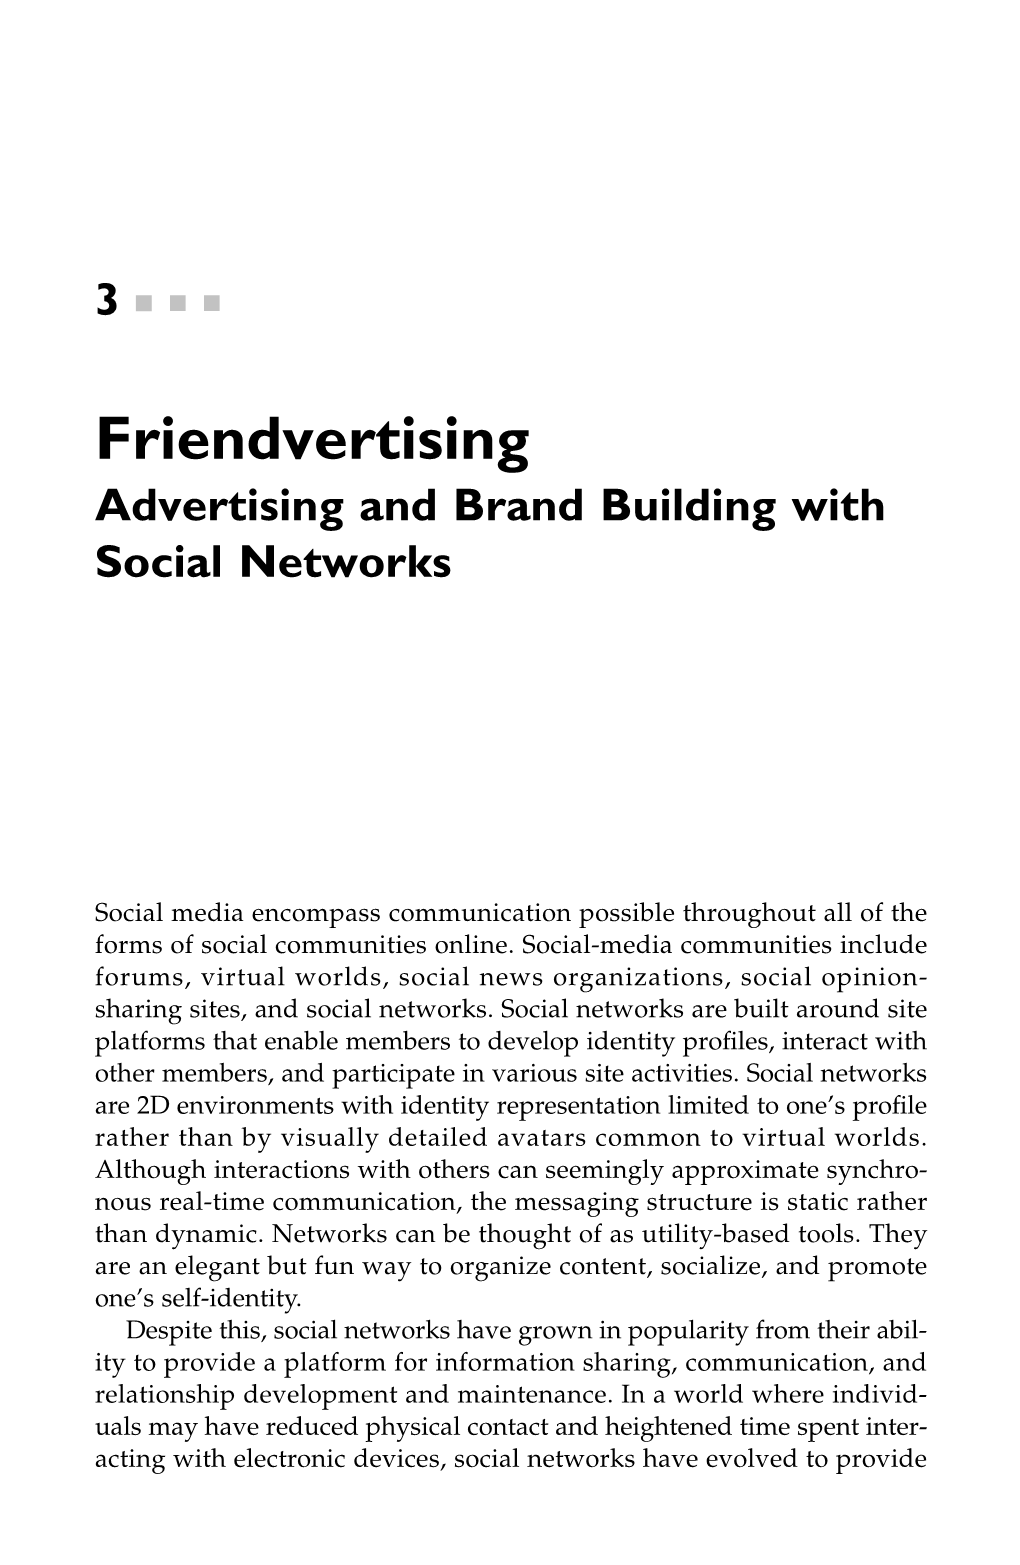 Friendvertising Advertising and Brand Building with Social Networks.Pdf